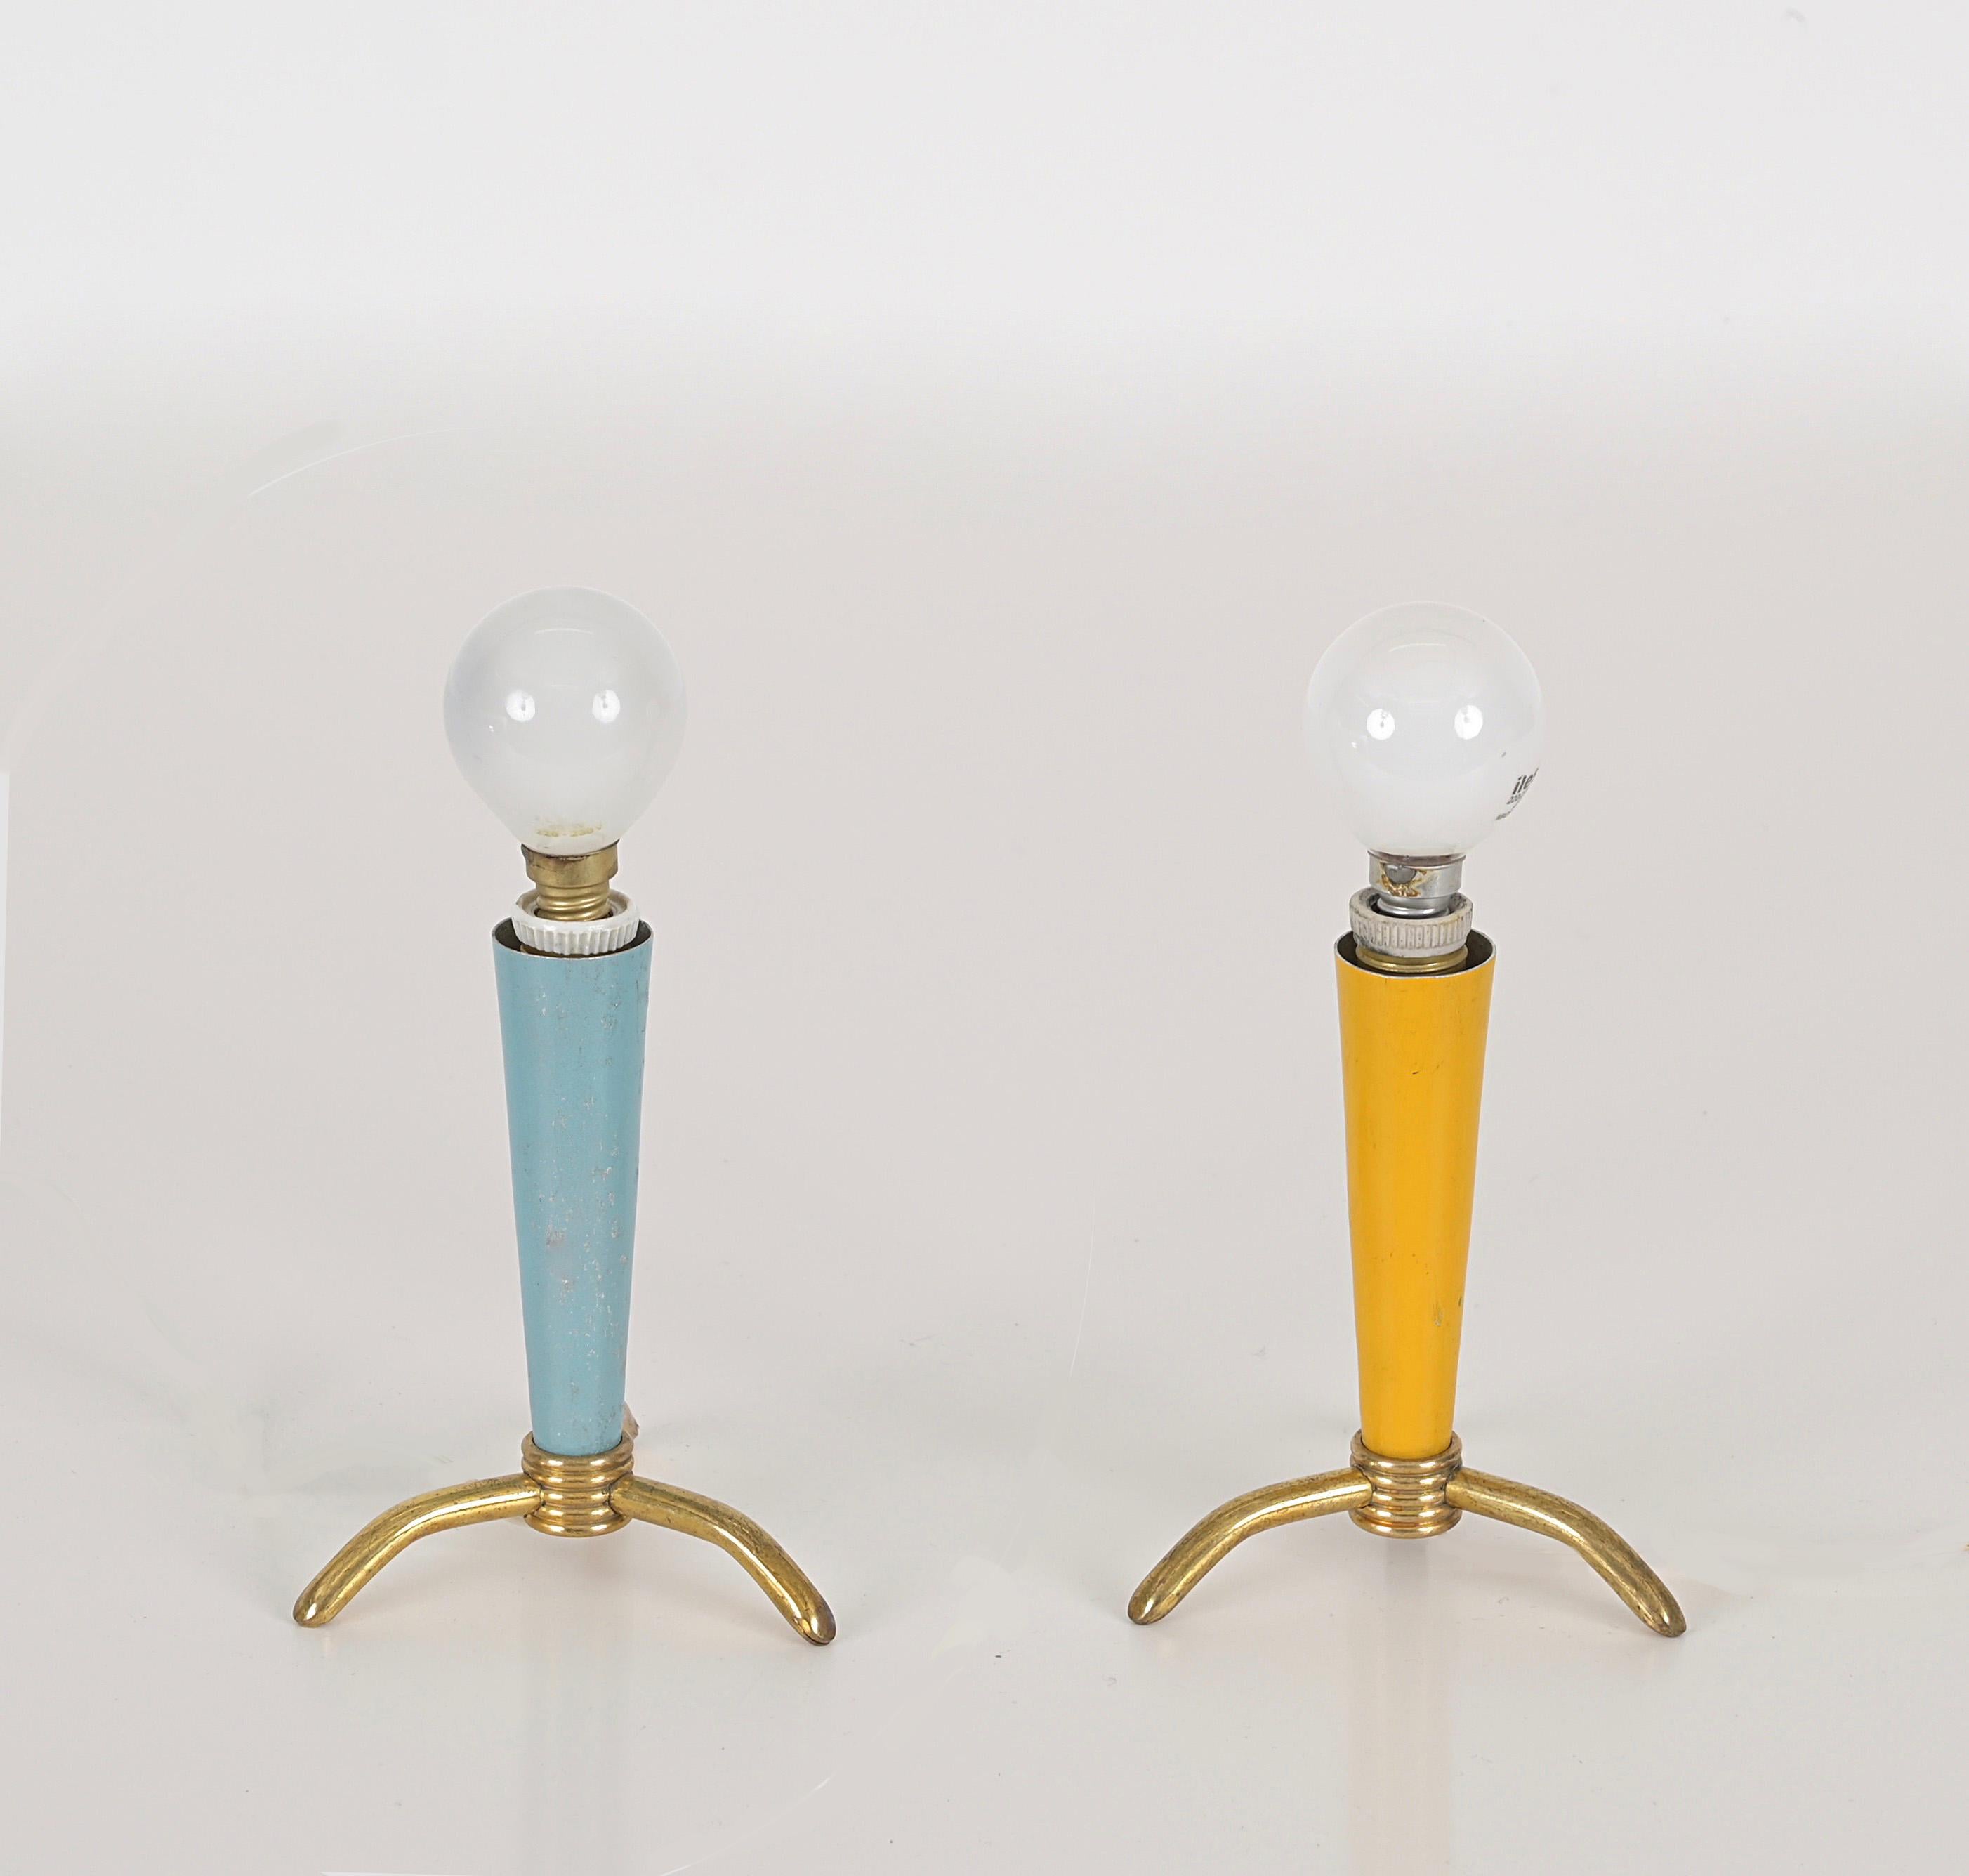 Pairs of Italian Table Lamps in Brass, Yellow and Tiffany Metal, Stilnovo, 1950s For Sale 6